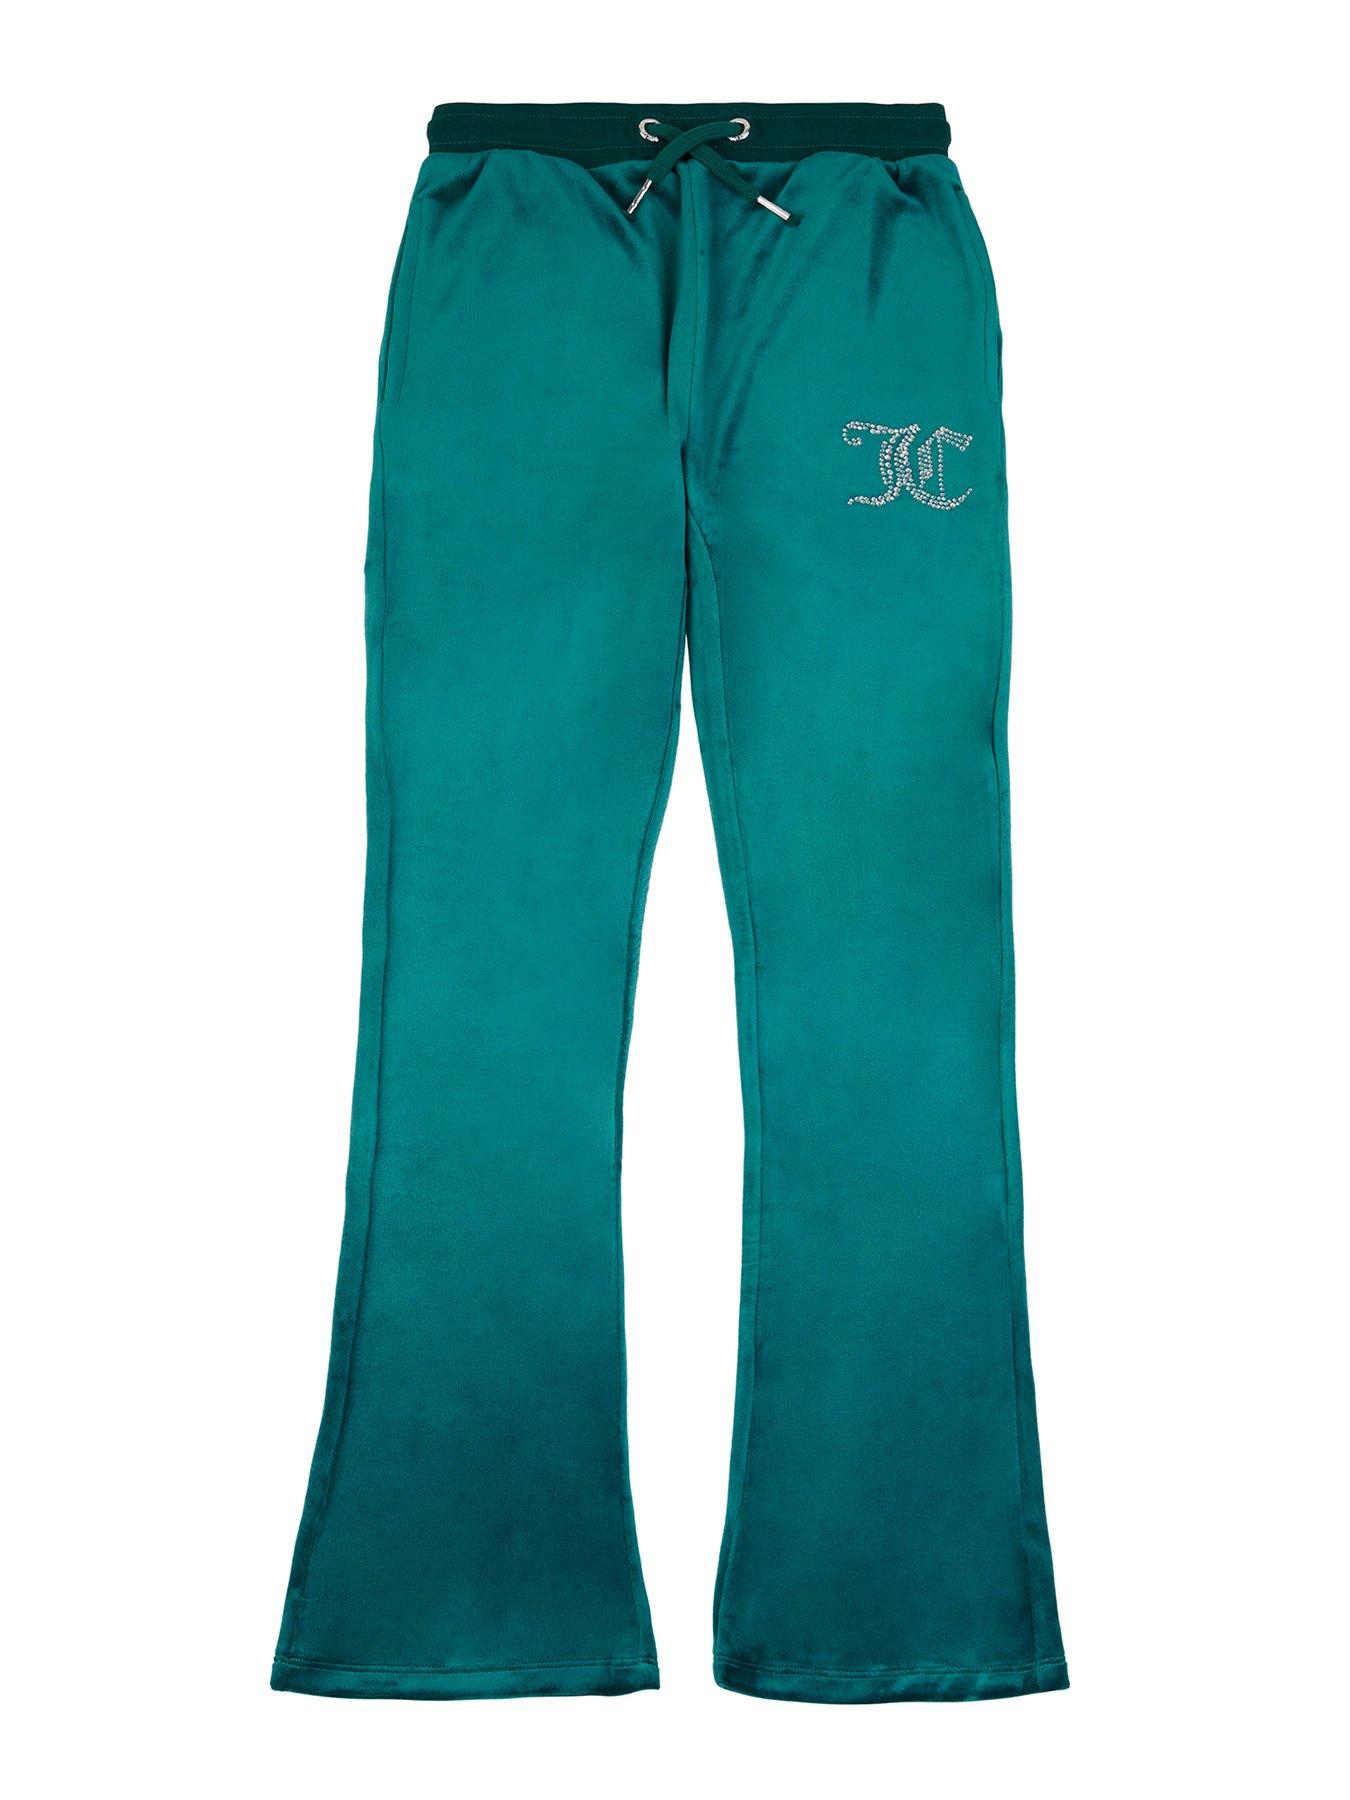 Juicy Couture TRACK PANTS - Tracksuit bottoms - nightsky/dark blue